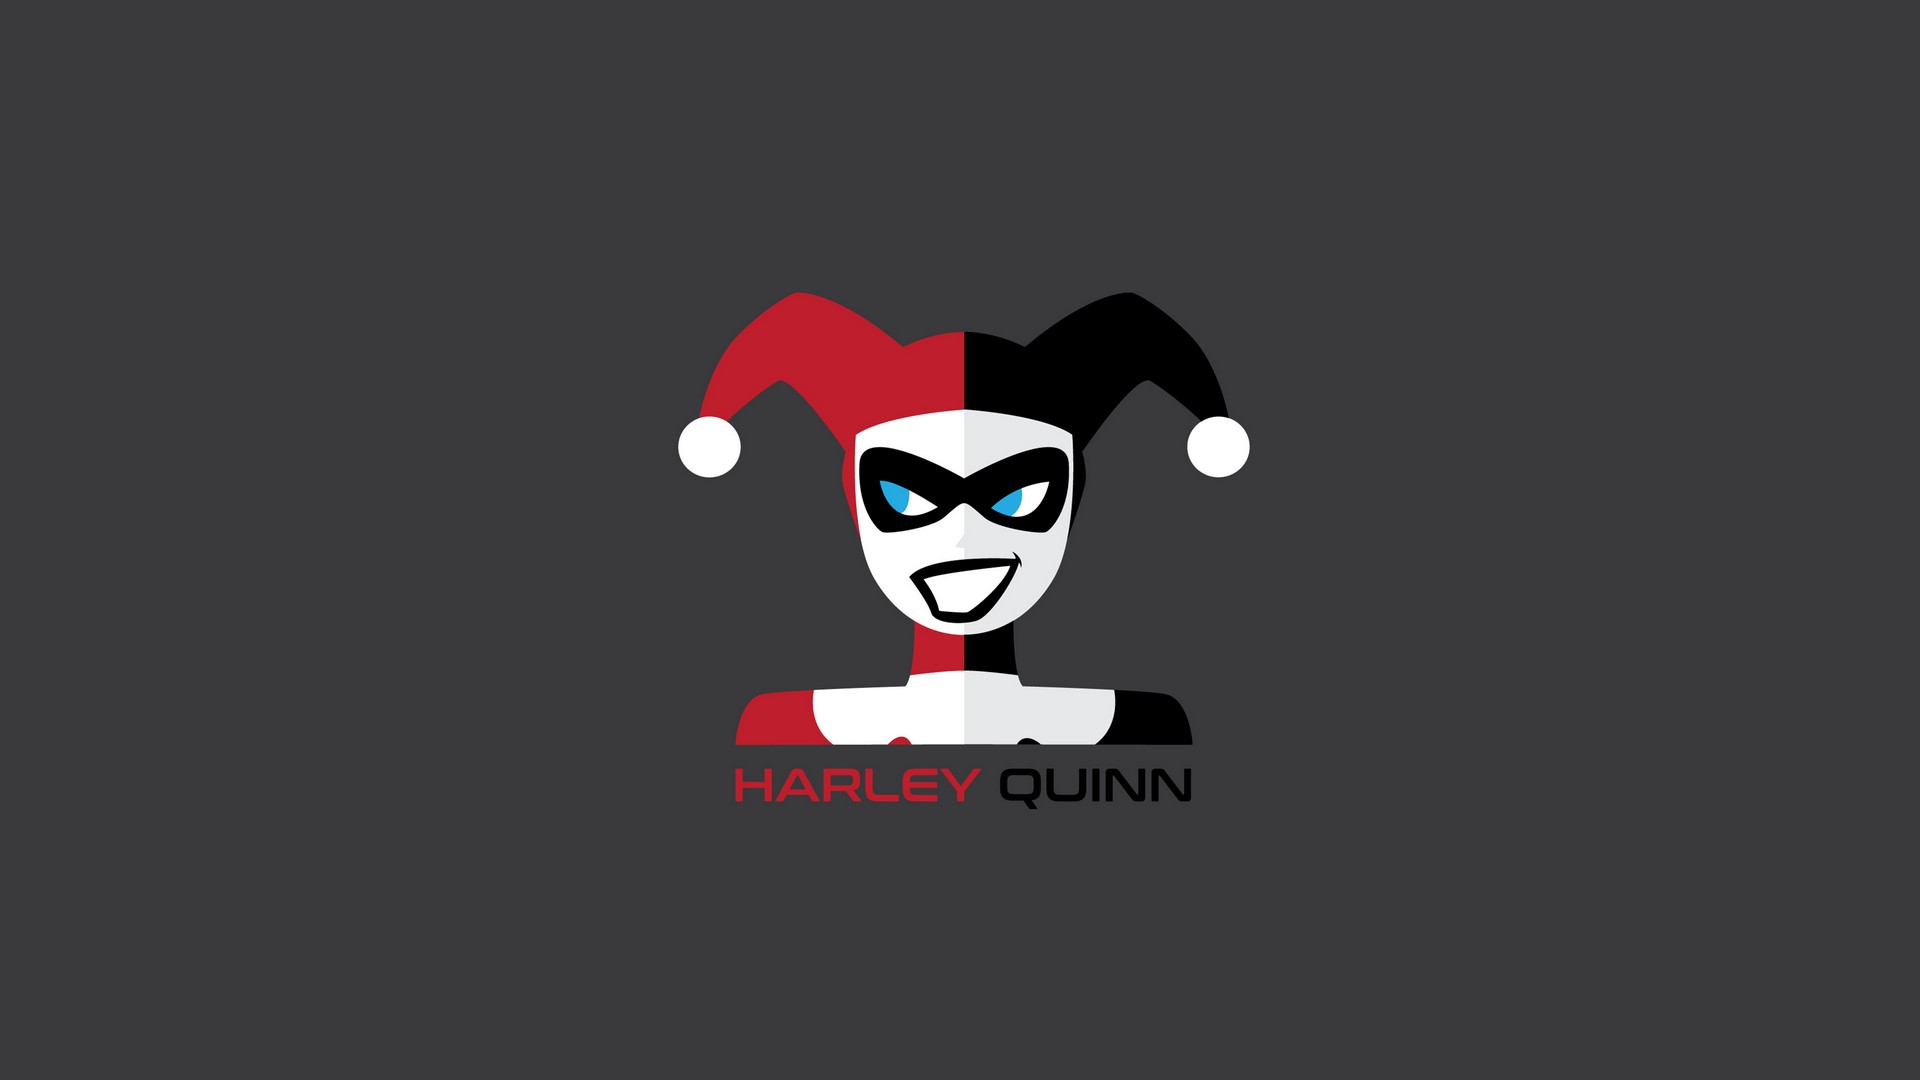 Harley Quinn Desktop Backgrounds HD with resolution 1920X1080 pixel. You can use this wallpaper as background for your desktop Computer Screensavers, Android or iPhone smartphones